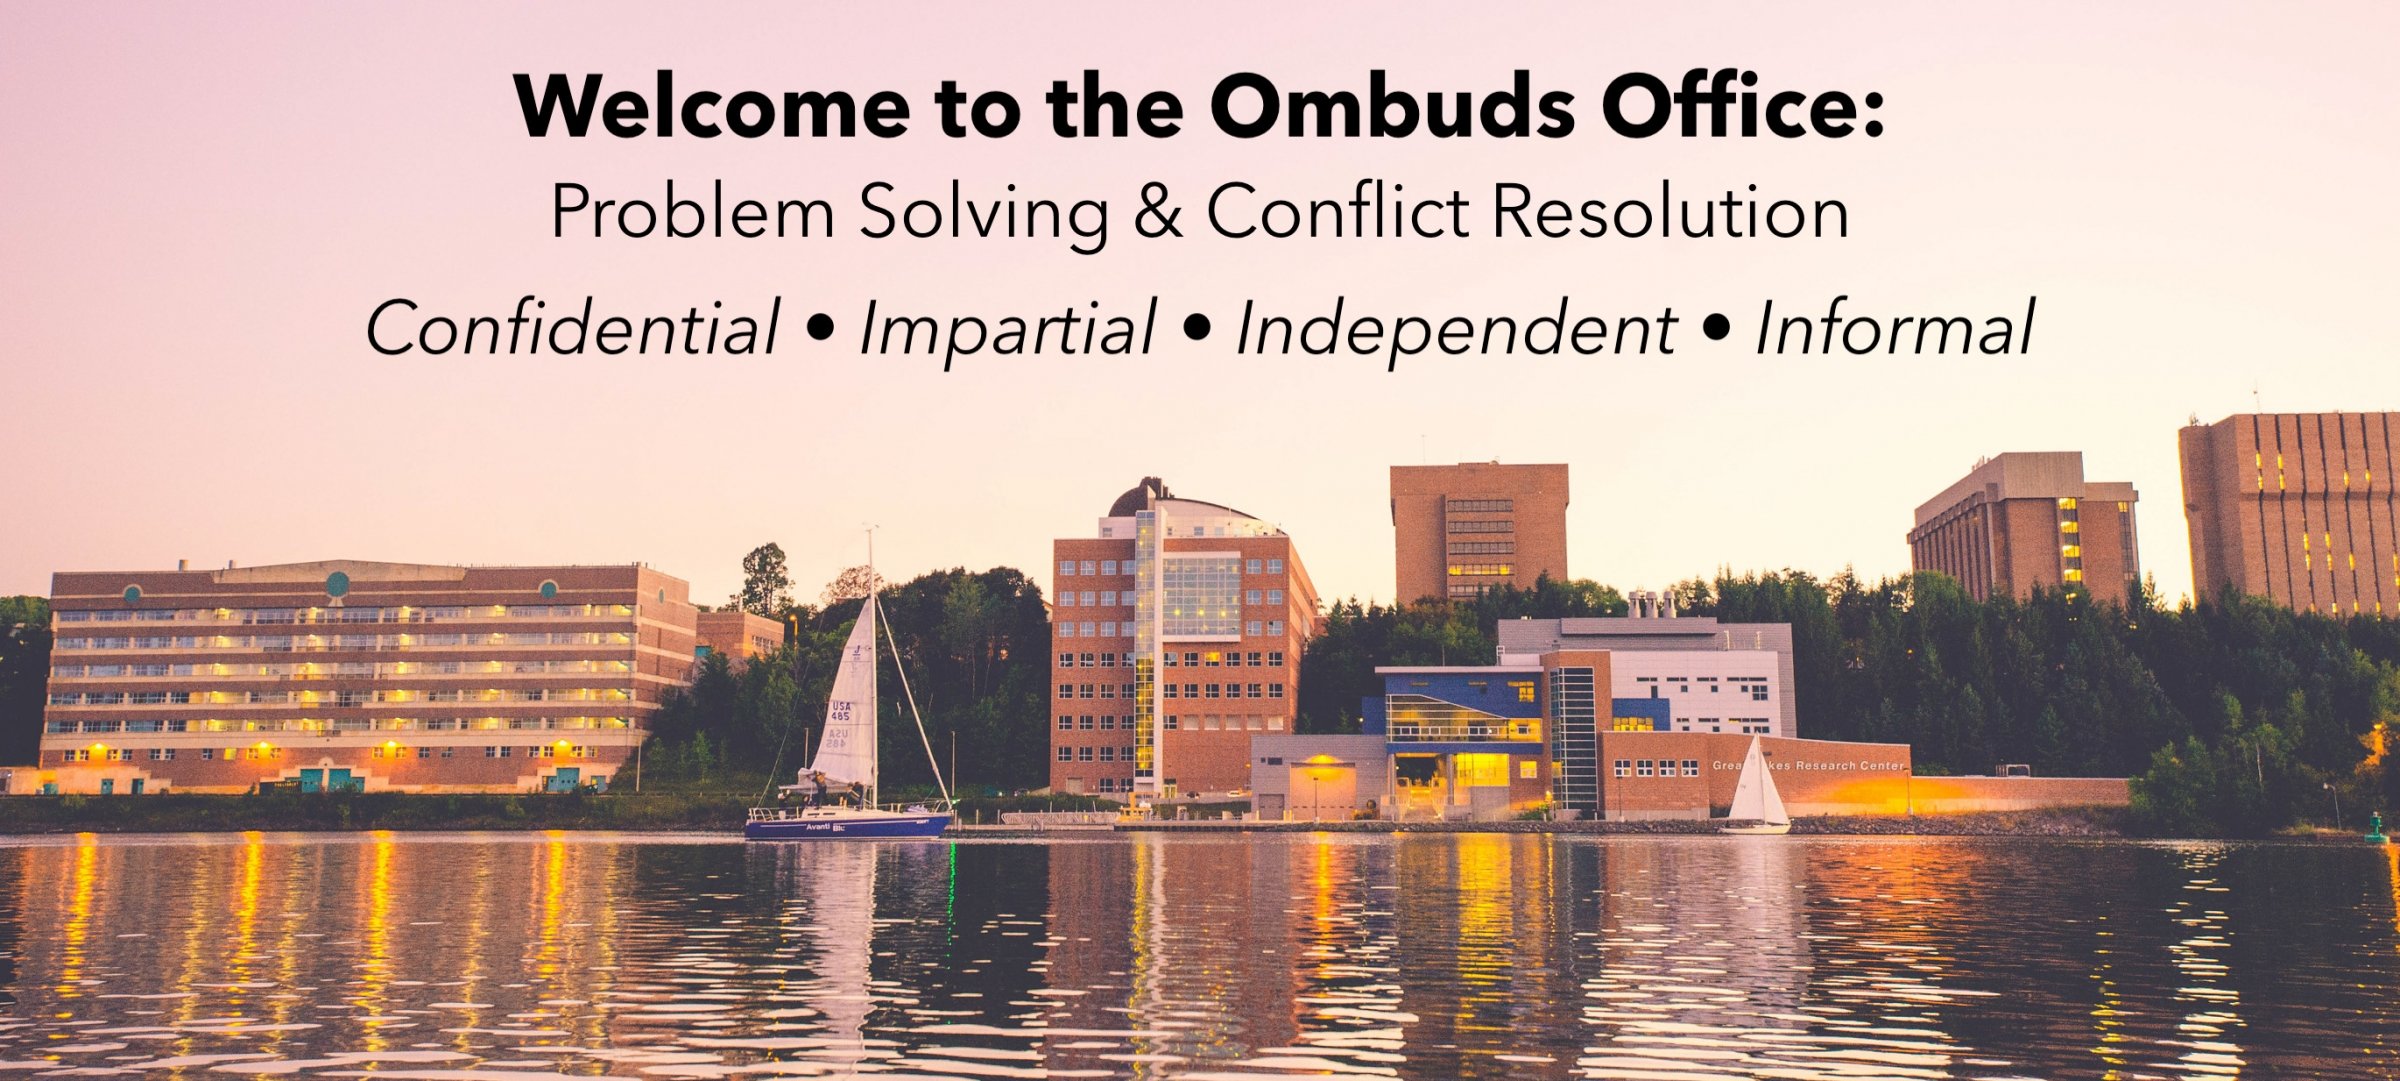 Welcome to the Ombuds Office: Problem Solving & Conflict Resolution. Confidential | Impartial | Independent | Informal